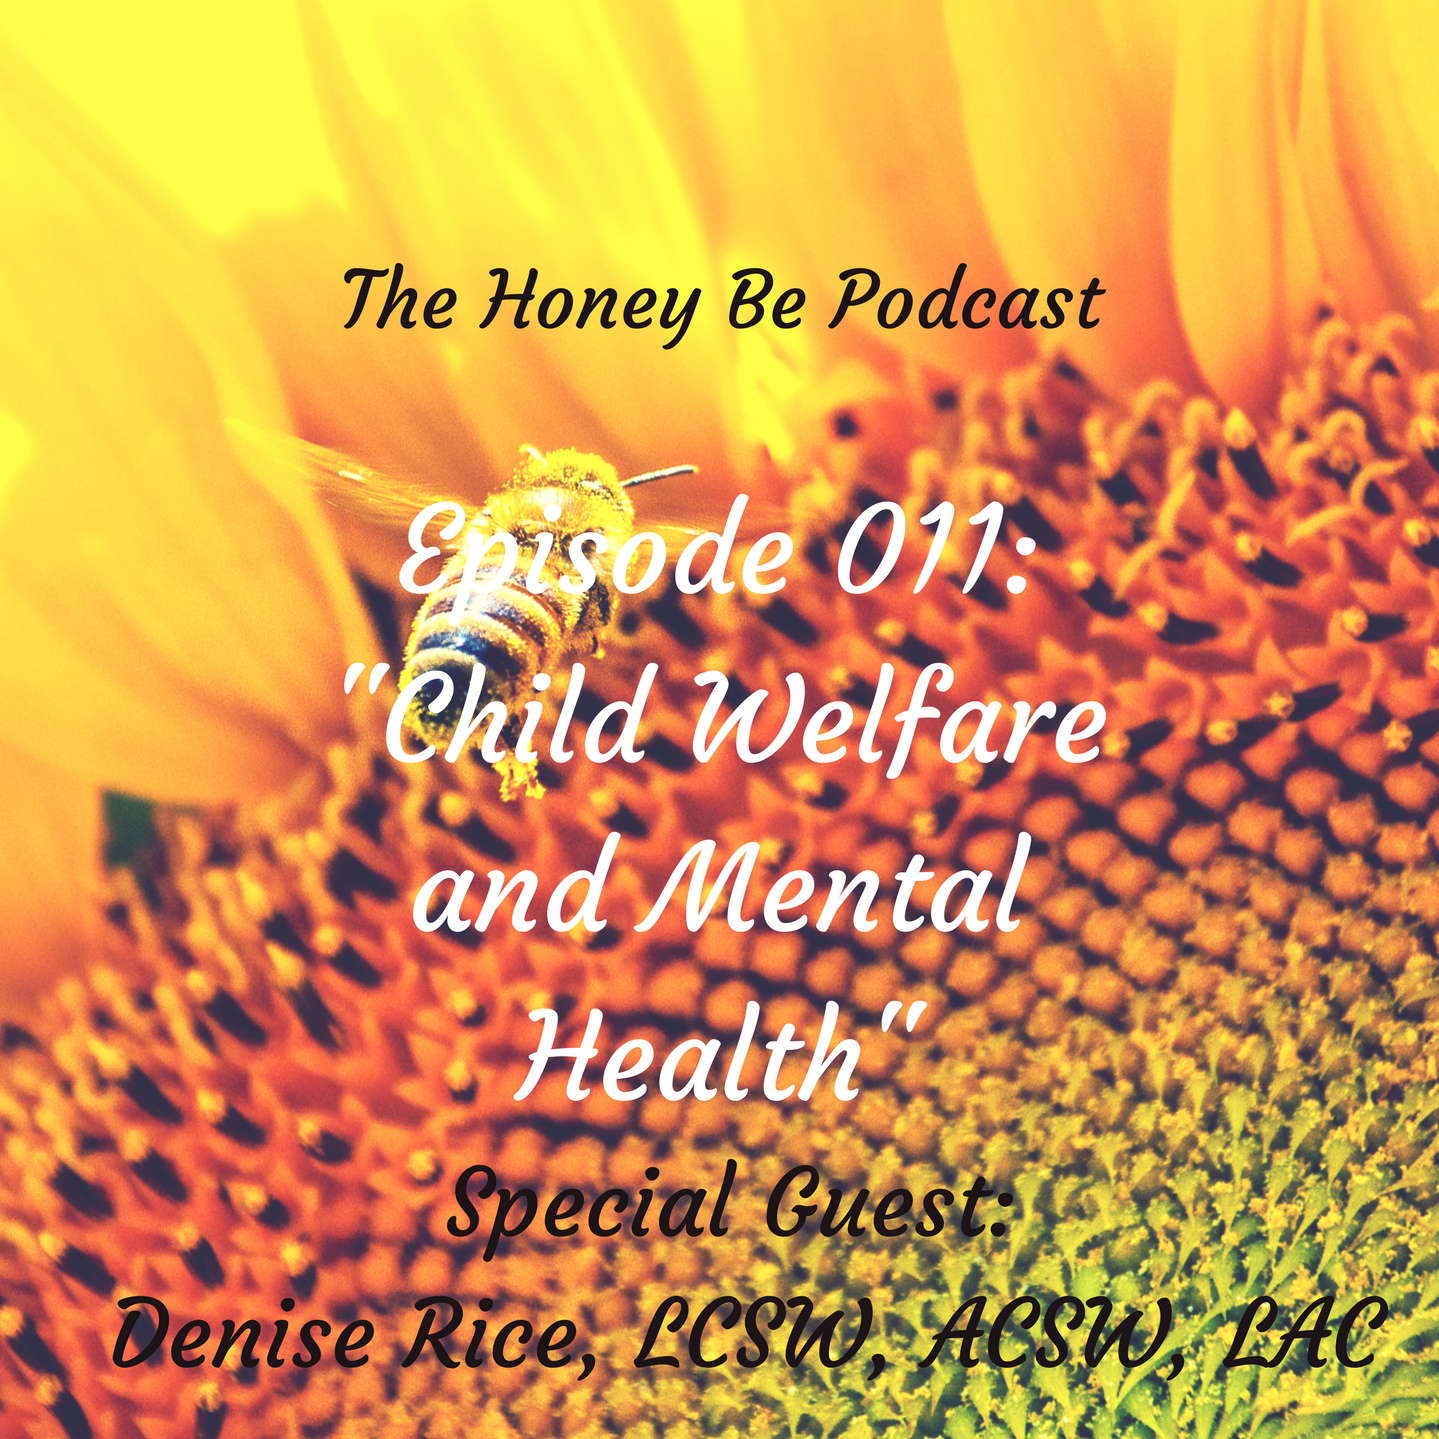 The Honey Be Podcast – Ep. 011: “Child Welfare and Mental Health”